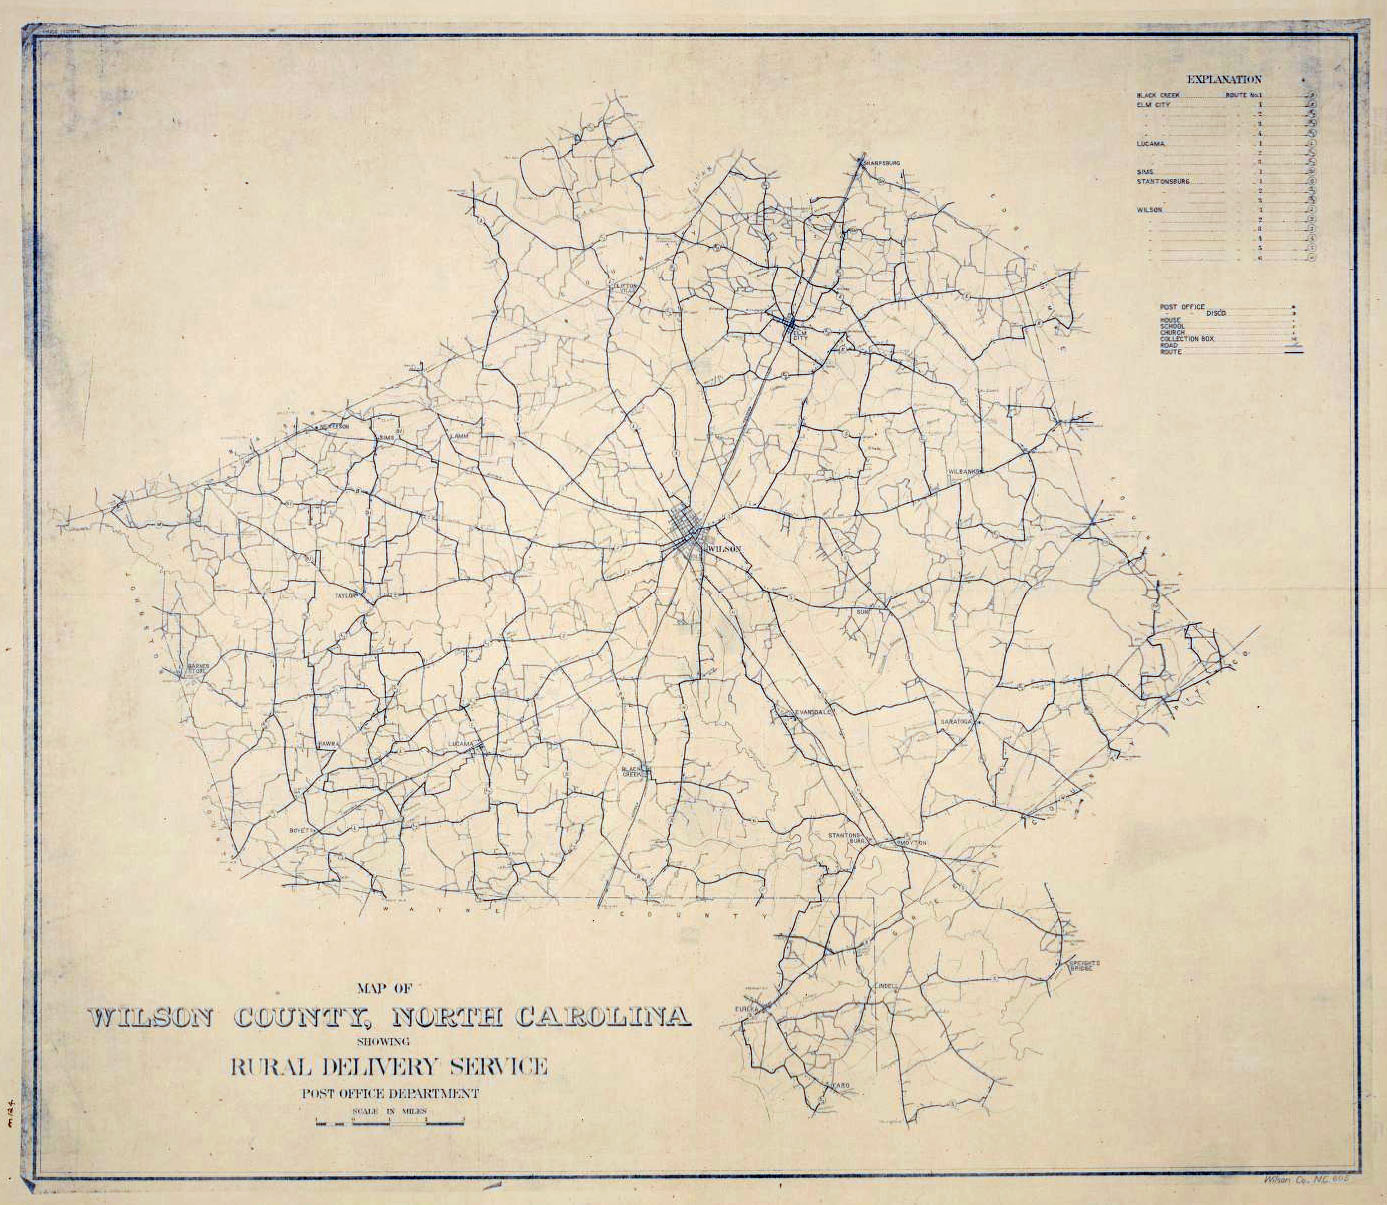 Map of Wilson County, North Carolina, showing rural delivery service.